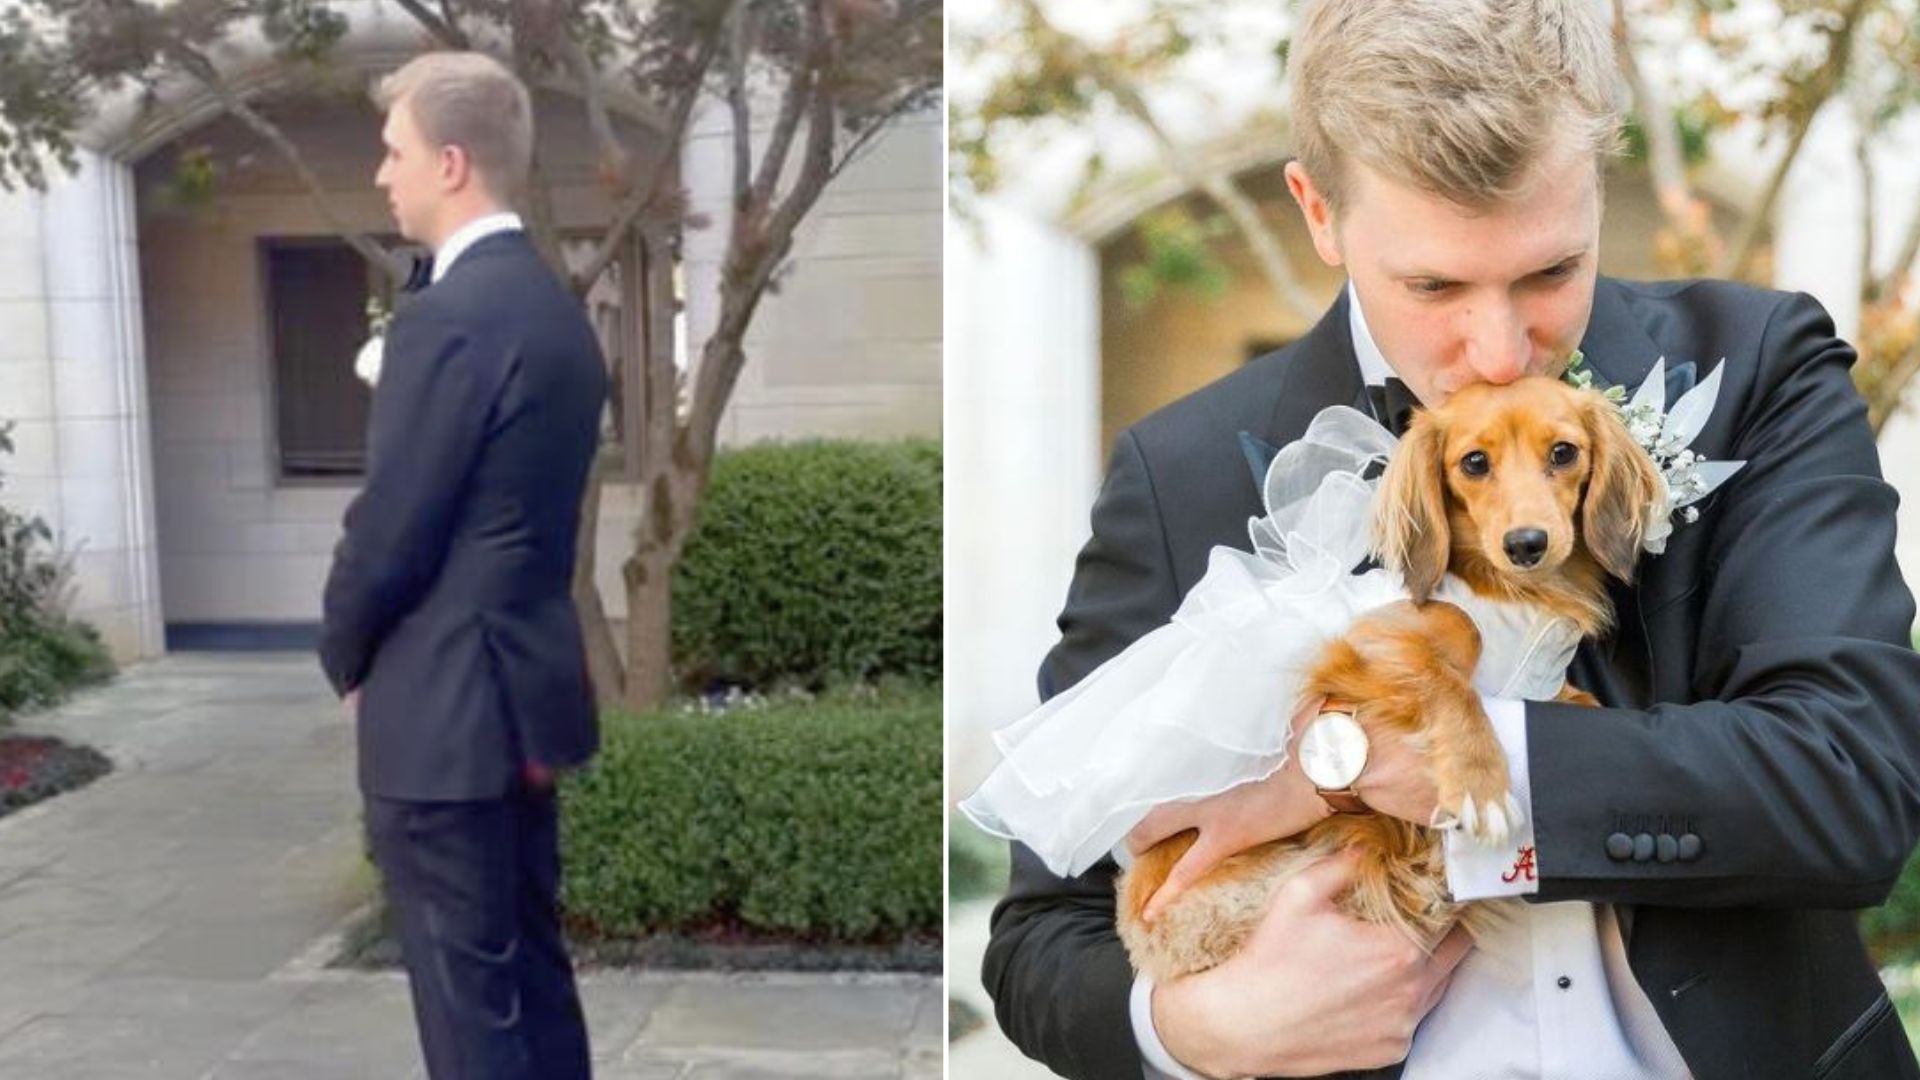 Instead Of The Bride, Groom Saw The Sweetest Surprise That Made The Wedding Day Extra Special